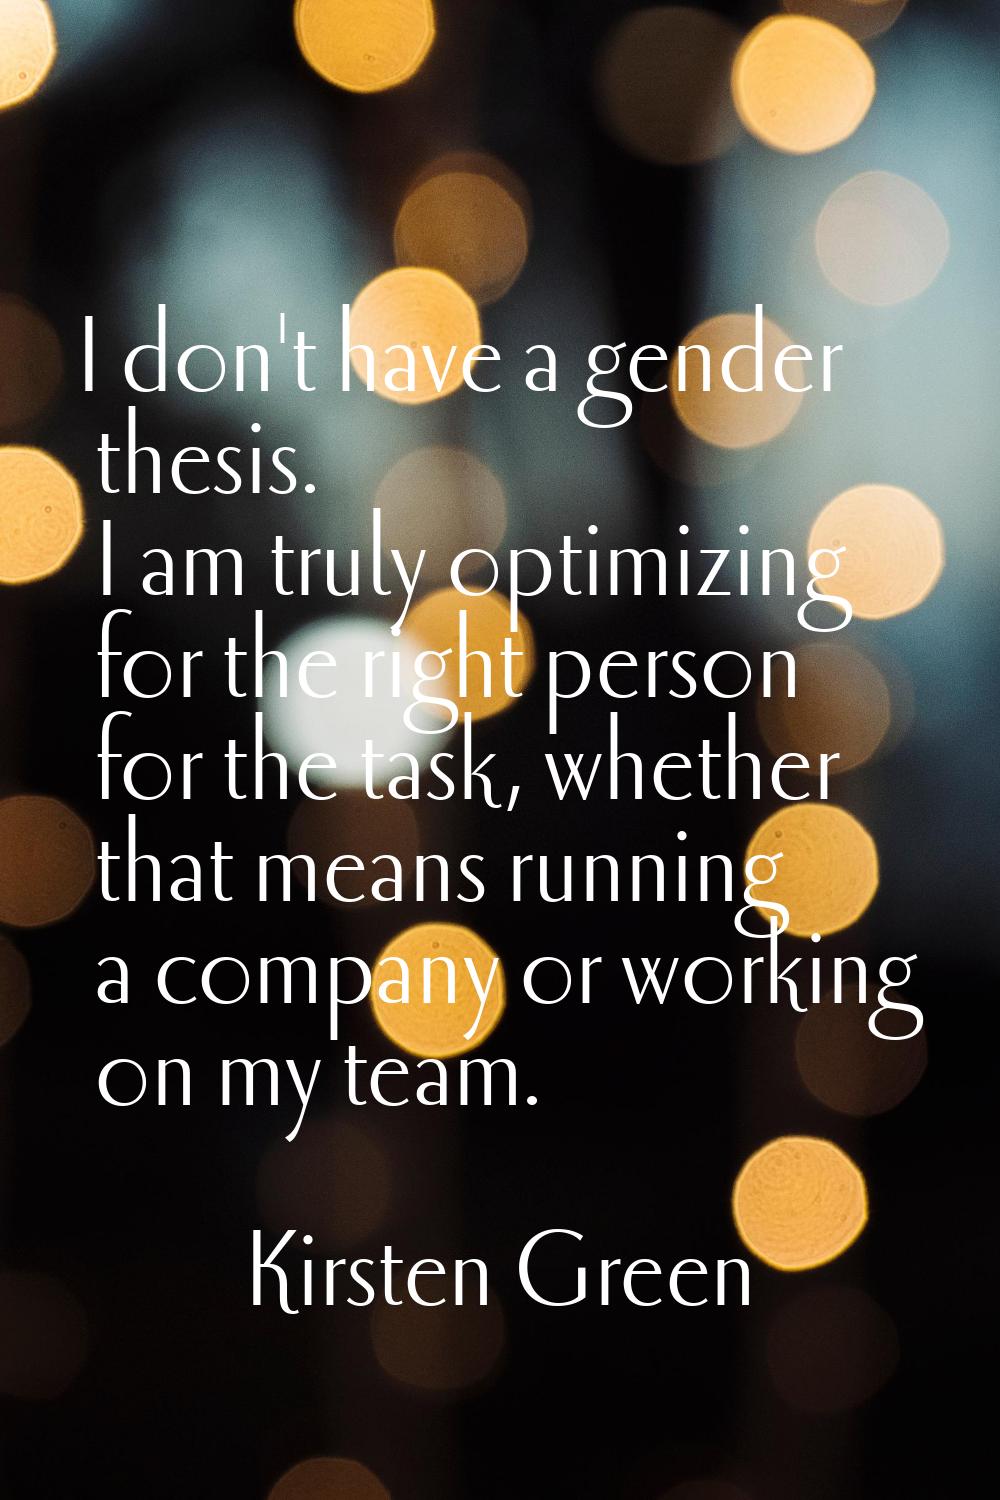 I don't have a gender thesis. I am truly optimizing for the right person for the task, whether that